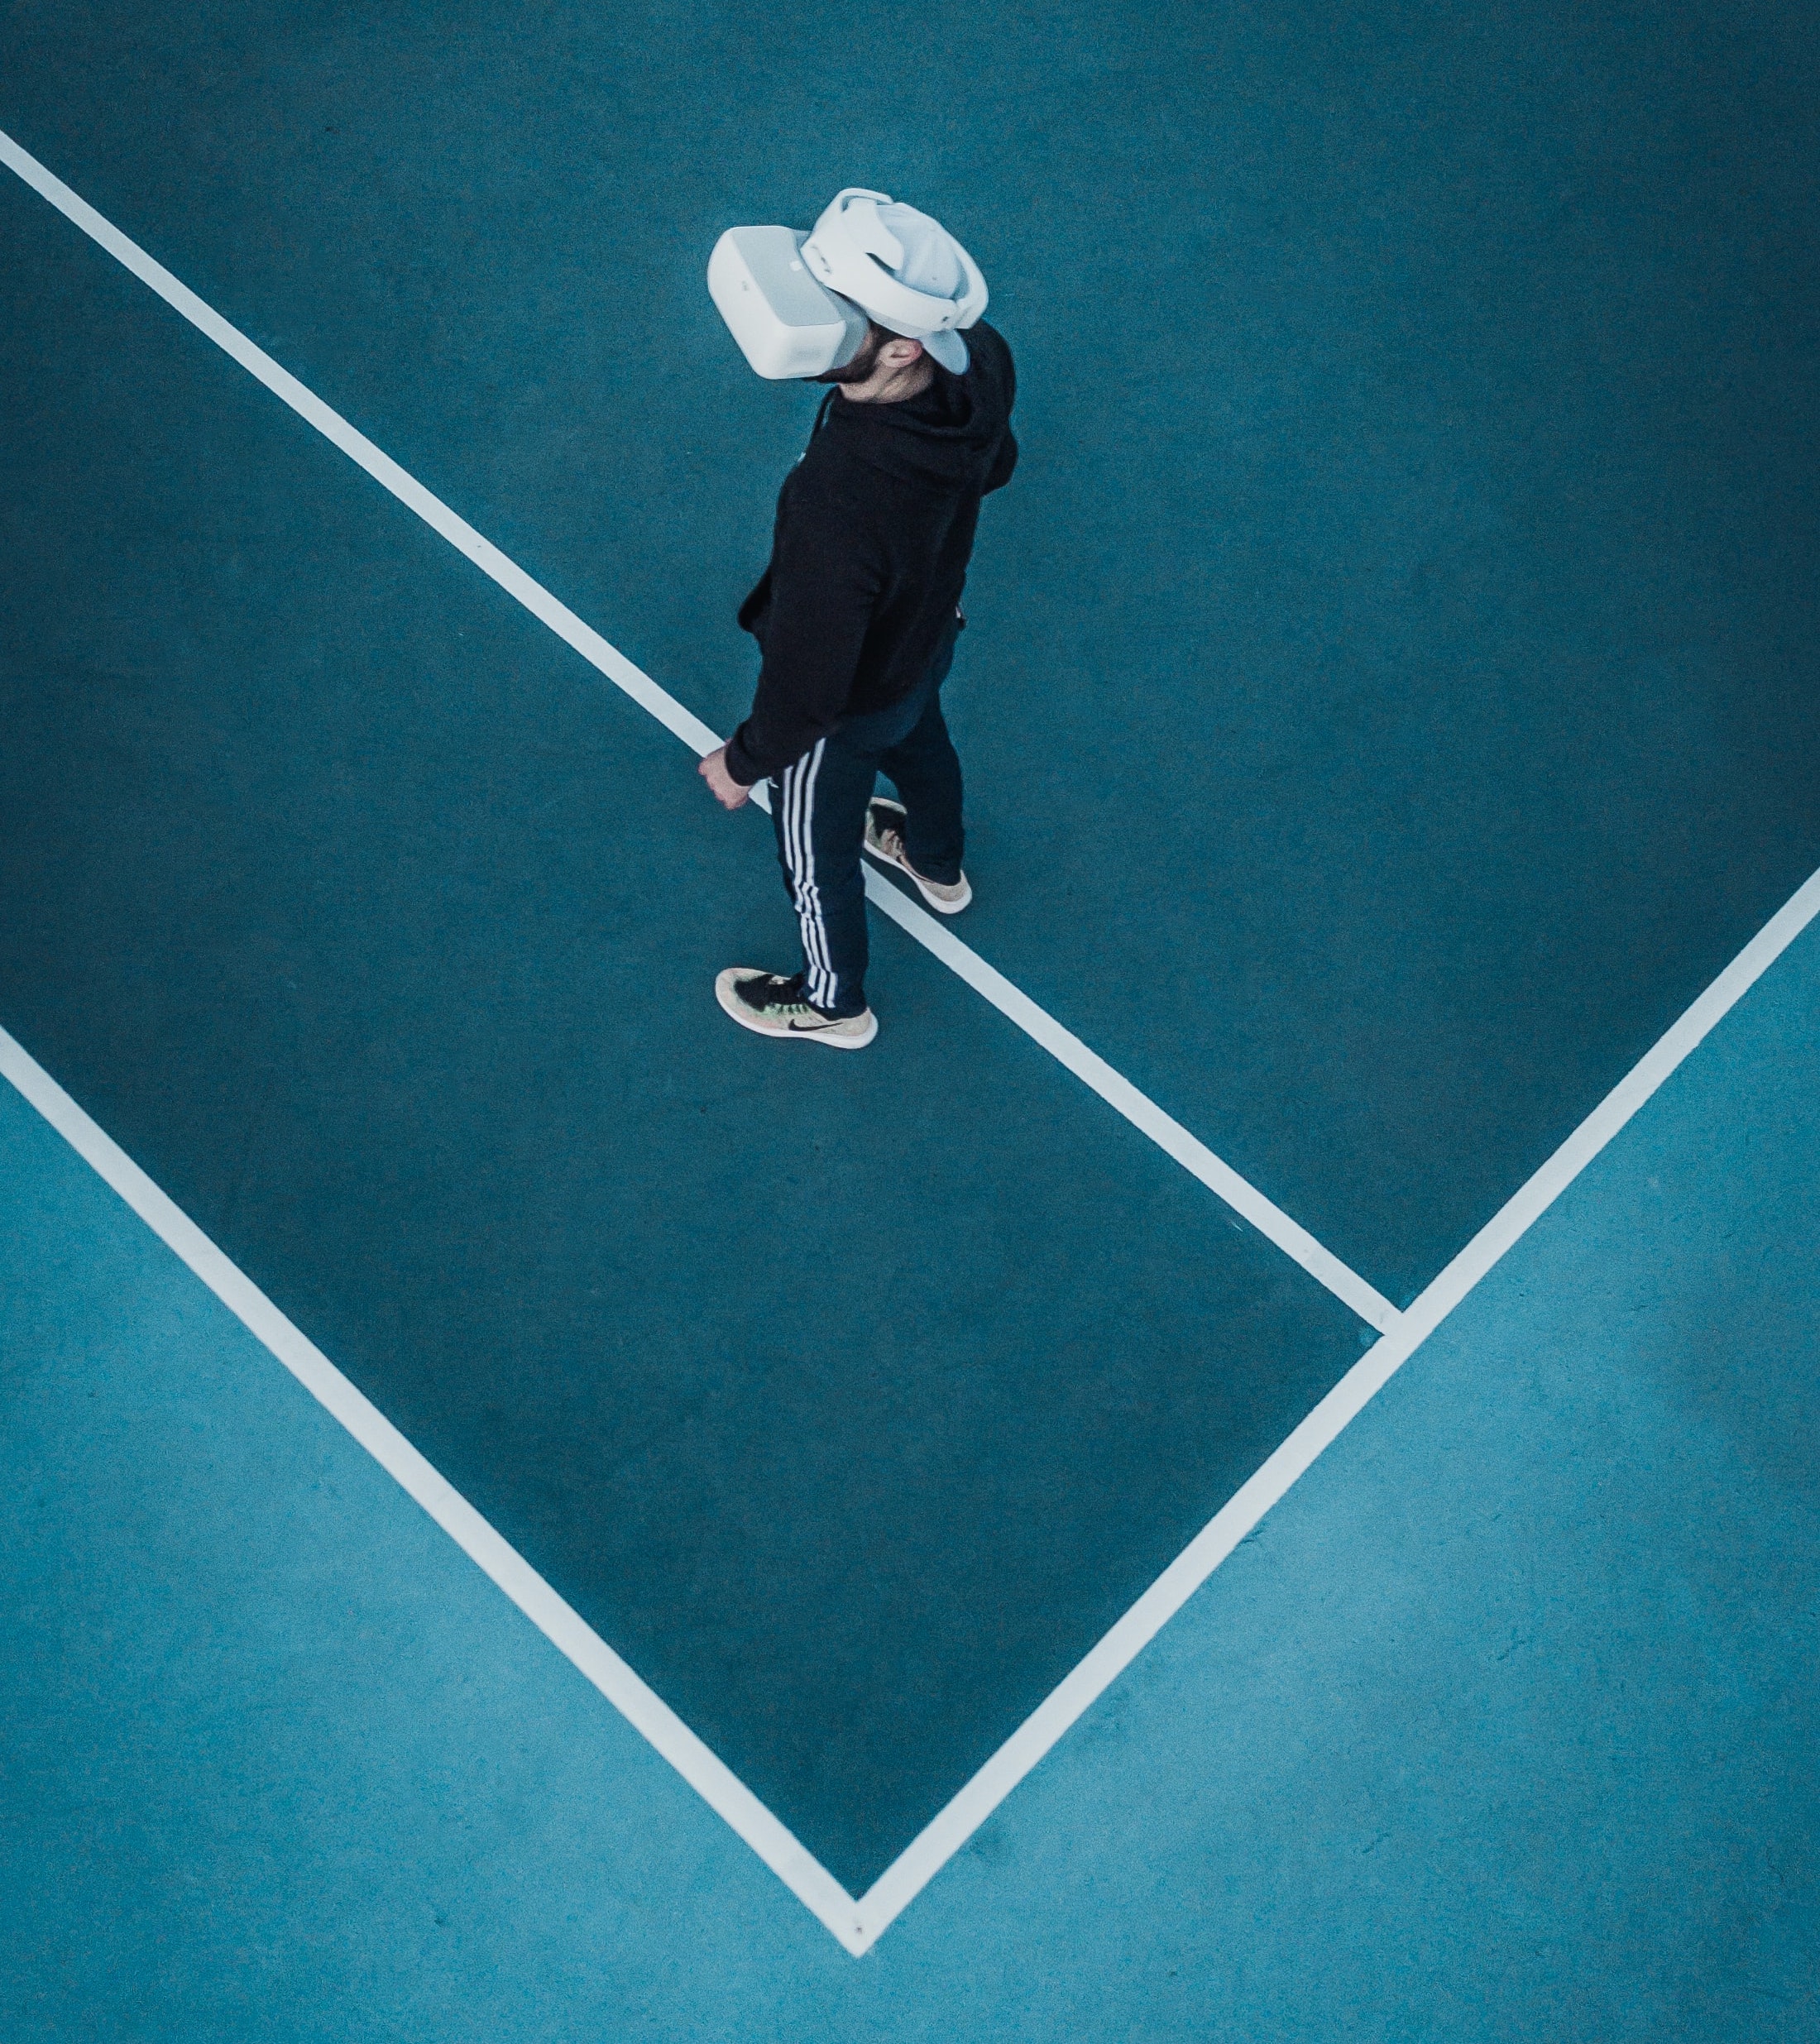 A person standing on a tennis court wearing virtual reality goggles.